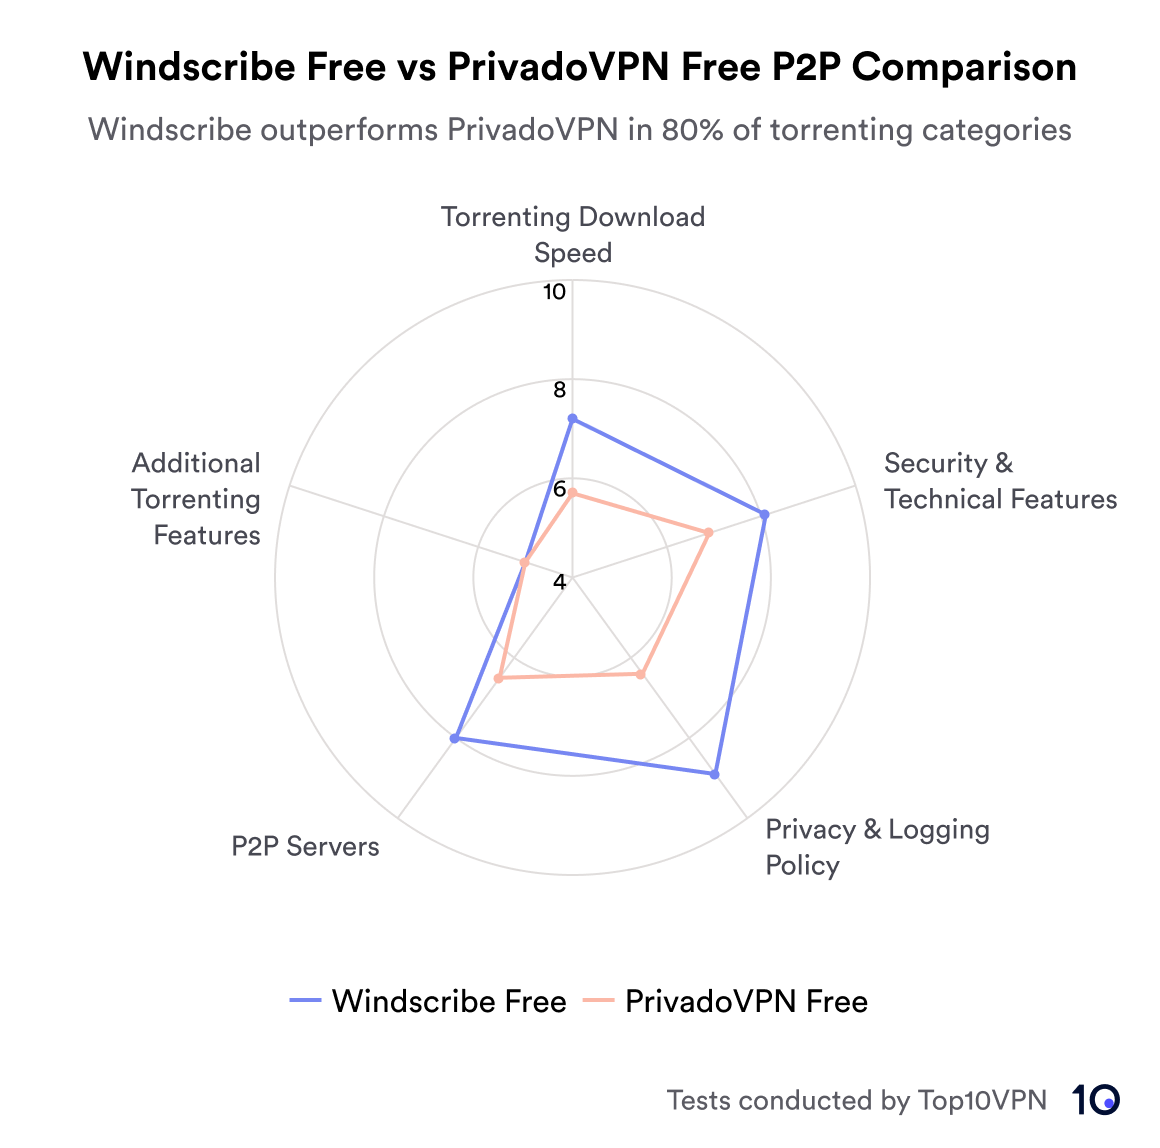 A radar chart comparing Windscribe Free and PrivadoVPN Free on P2P aspects; Windscribe generally scores higher.